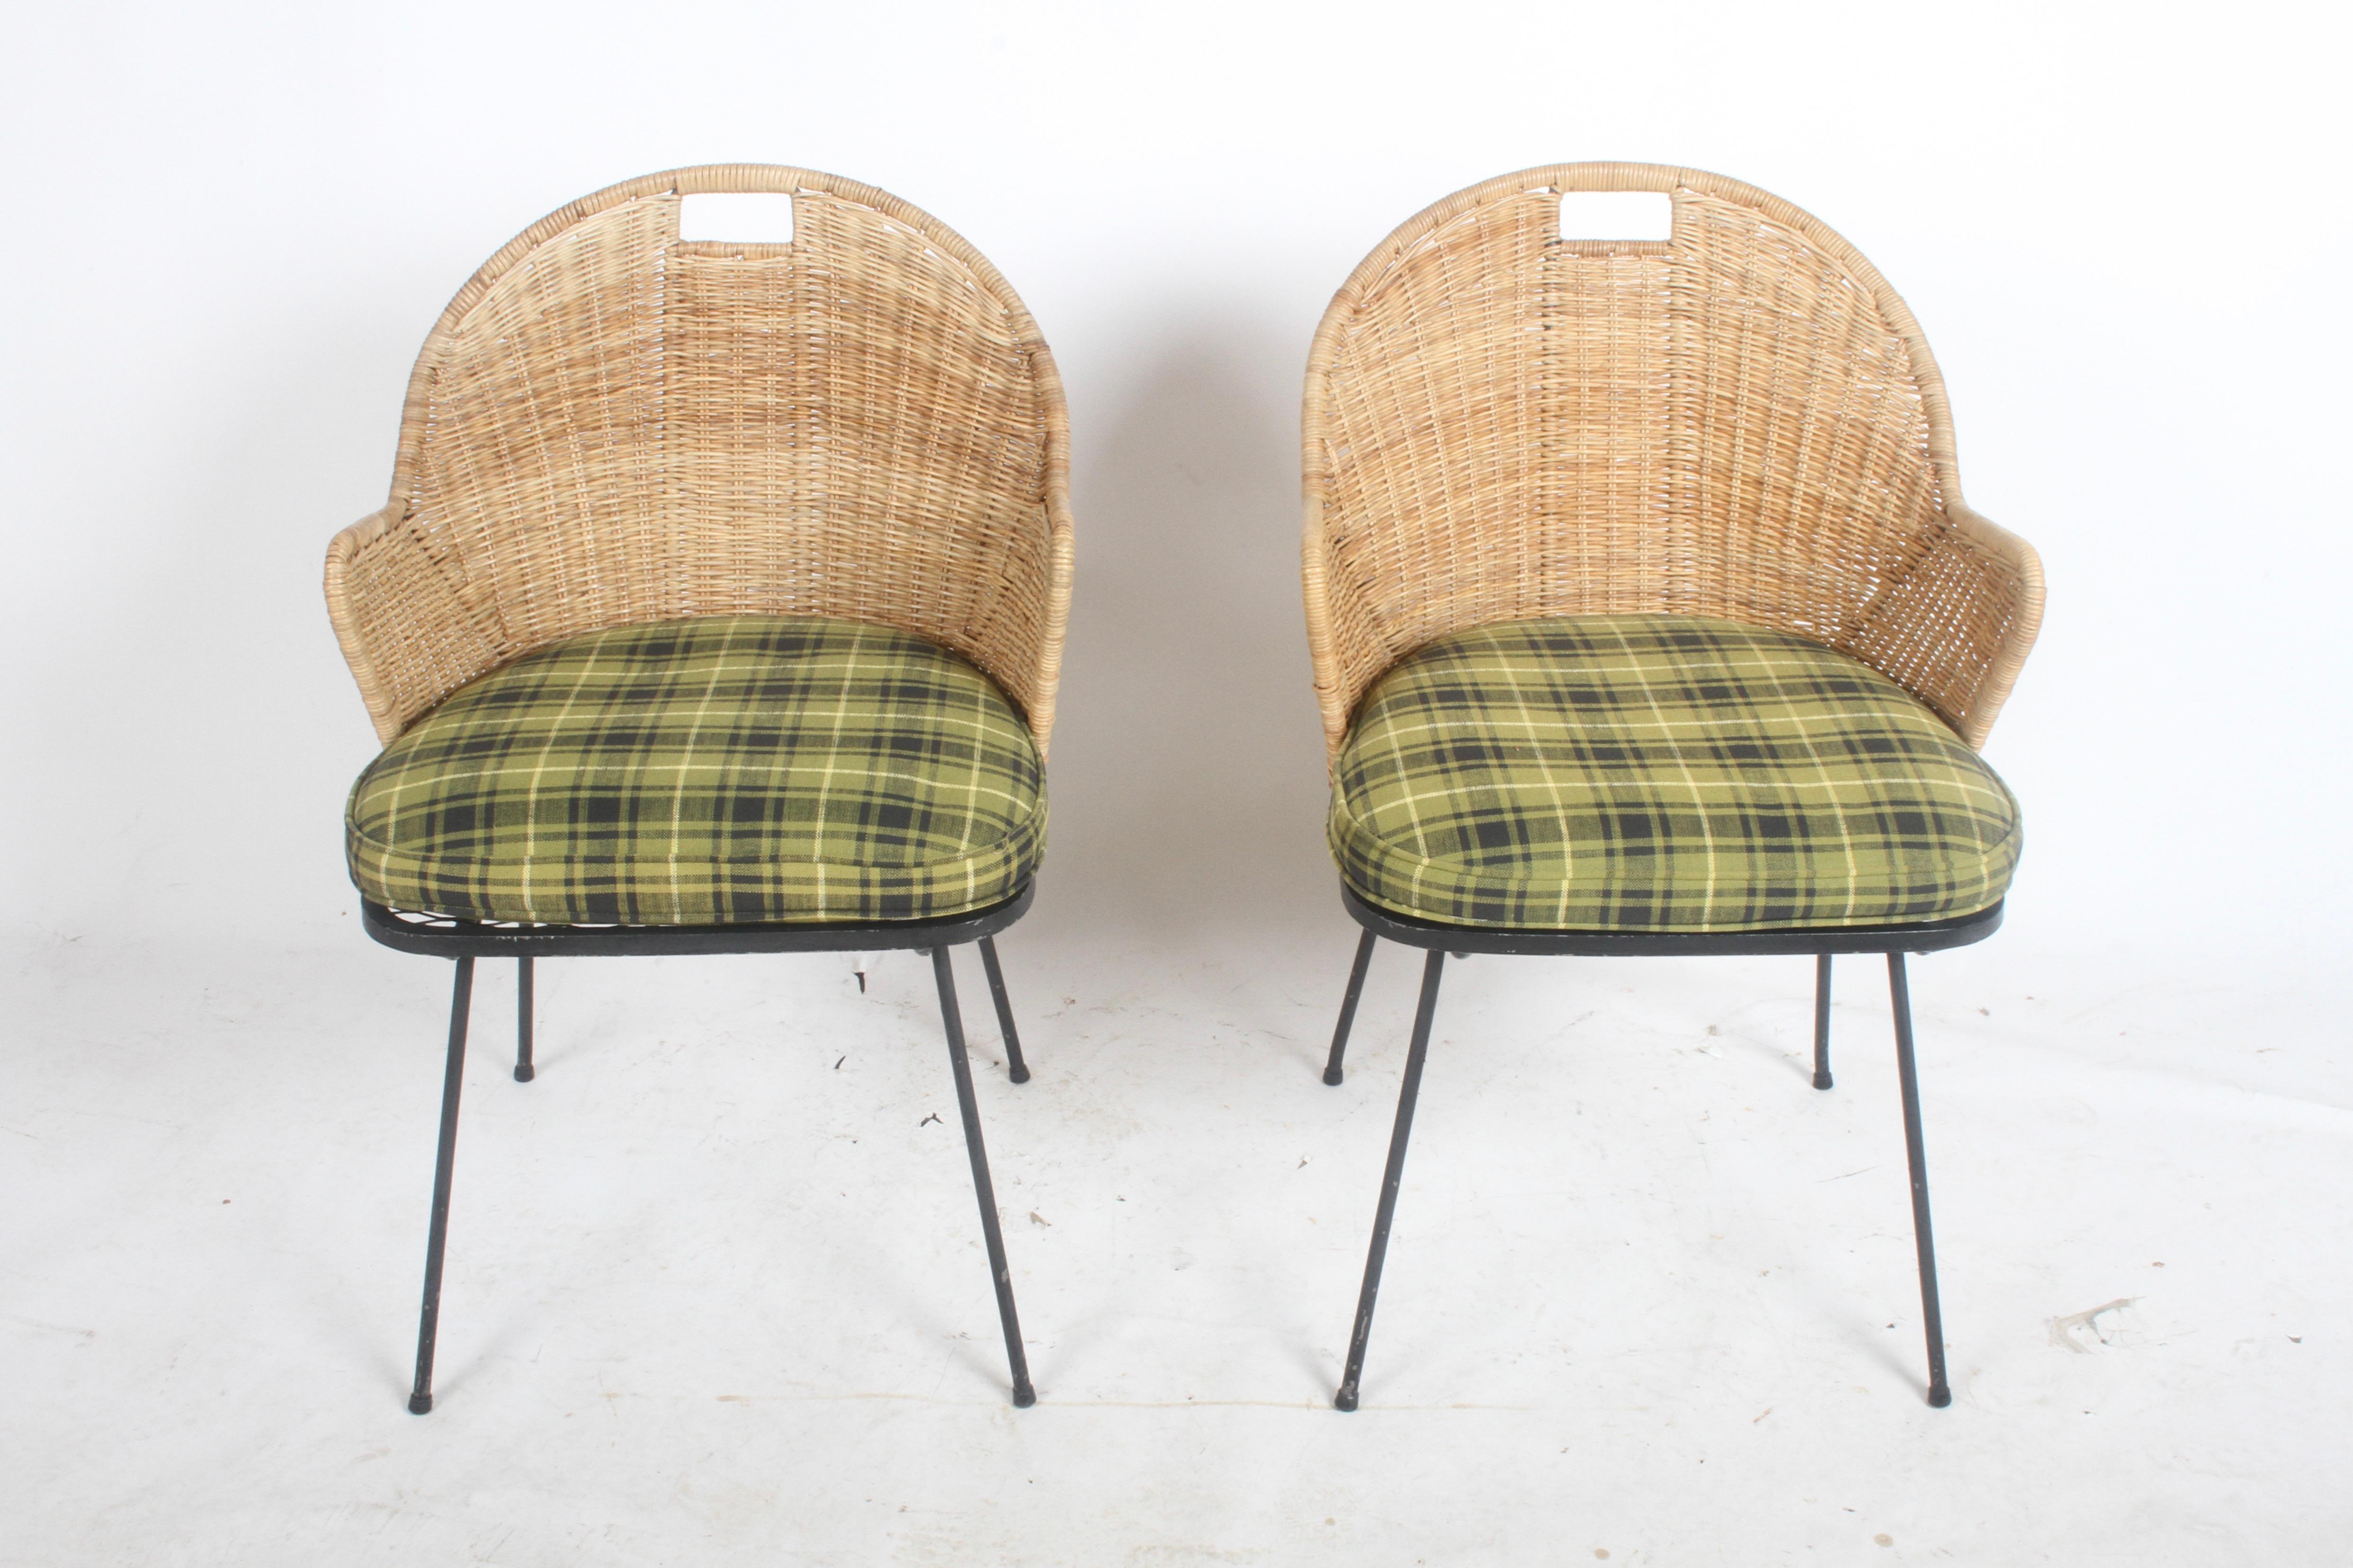 Set of 4 Maurizio Tempestini for Salterini black wrought & wicker patio or sunroom dining chairs with vintage green / black and creme plaid seat cushions over diamond mesh seats. Part of Salterini Neva-Rust series , these chairs are in nice